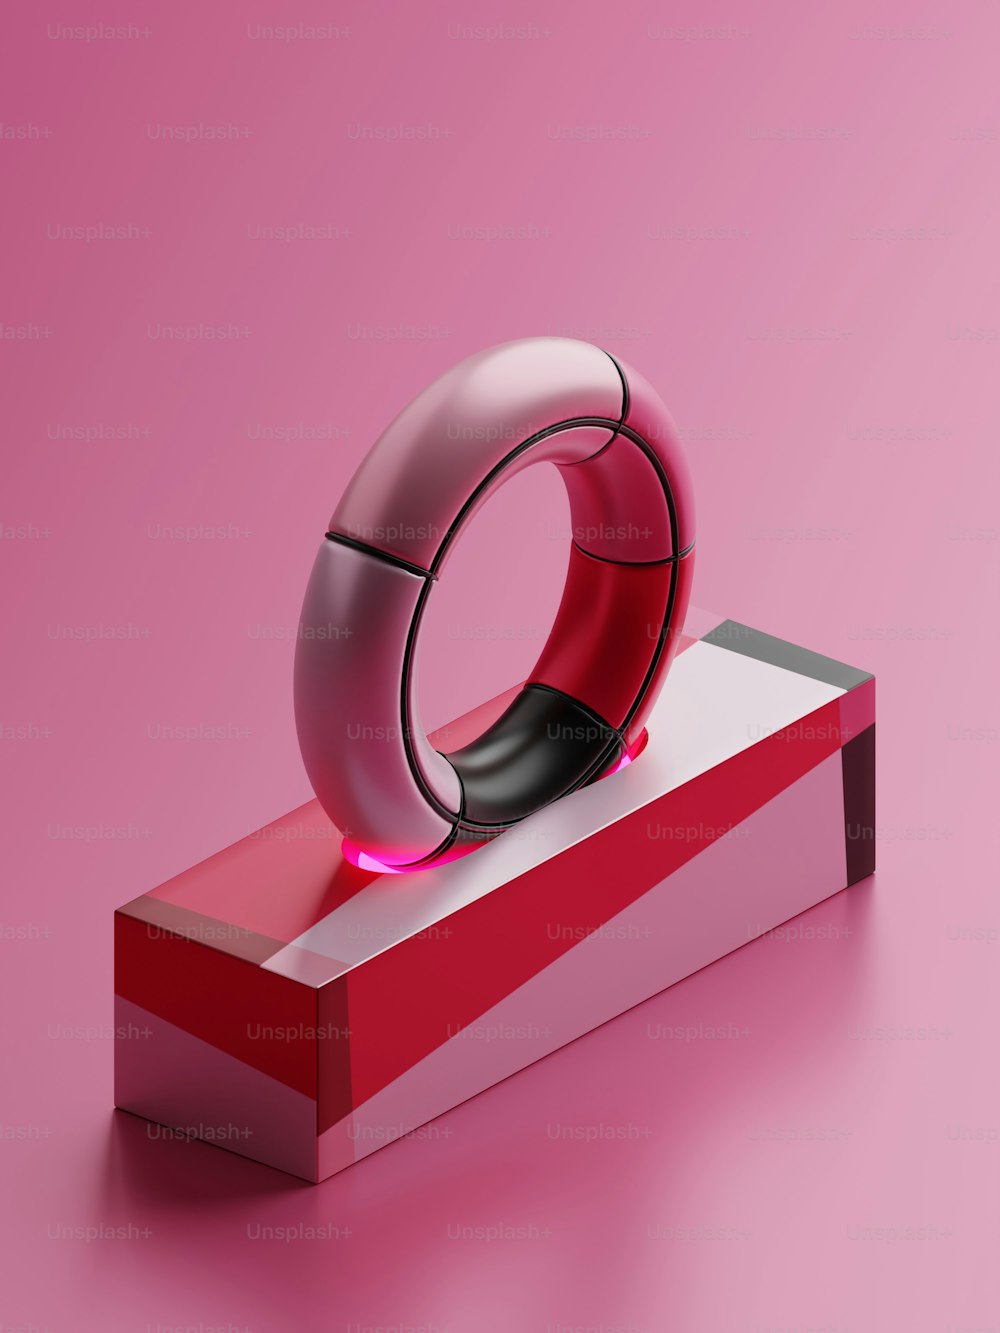 a red and white object on a pink surface